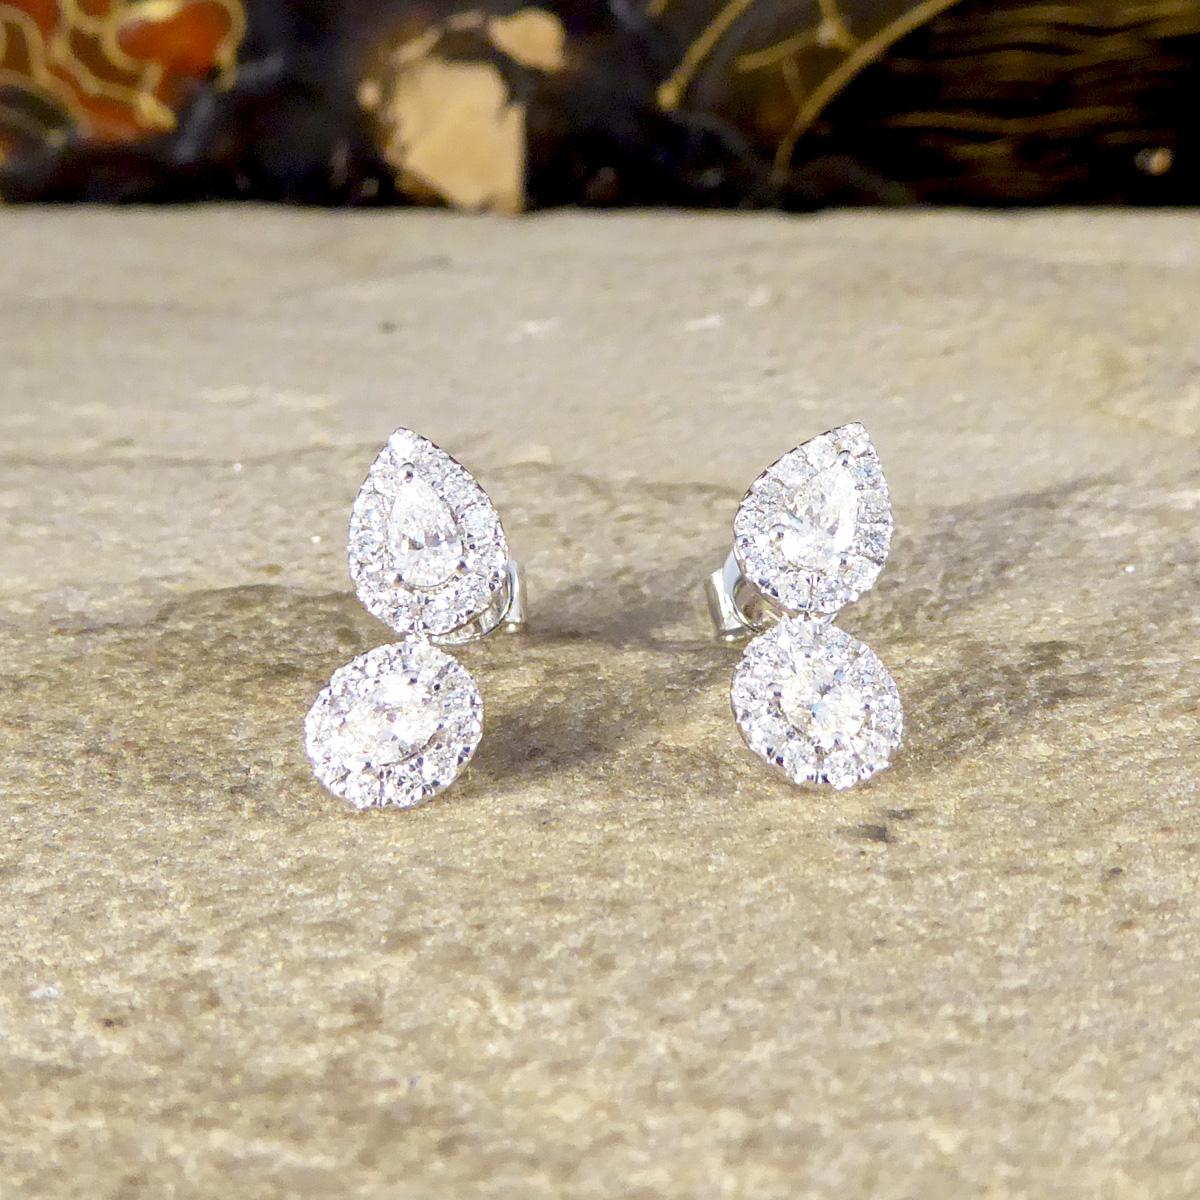 An unusual and eye catching pair of Diamond stud earrings. Each stud features a Pear cut Diamond cluster and an offset Oval cut Diamond cluster sitting just below and creating the most aw-inspiring design. Perfect for anyone who likes an additional